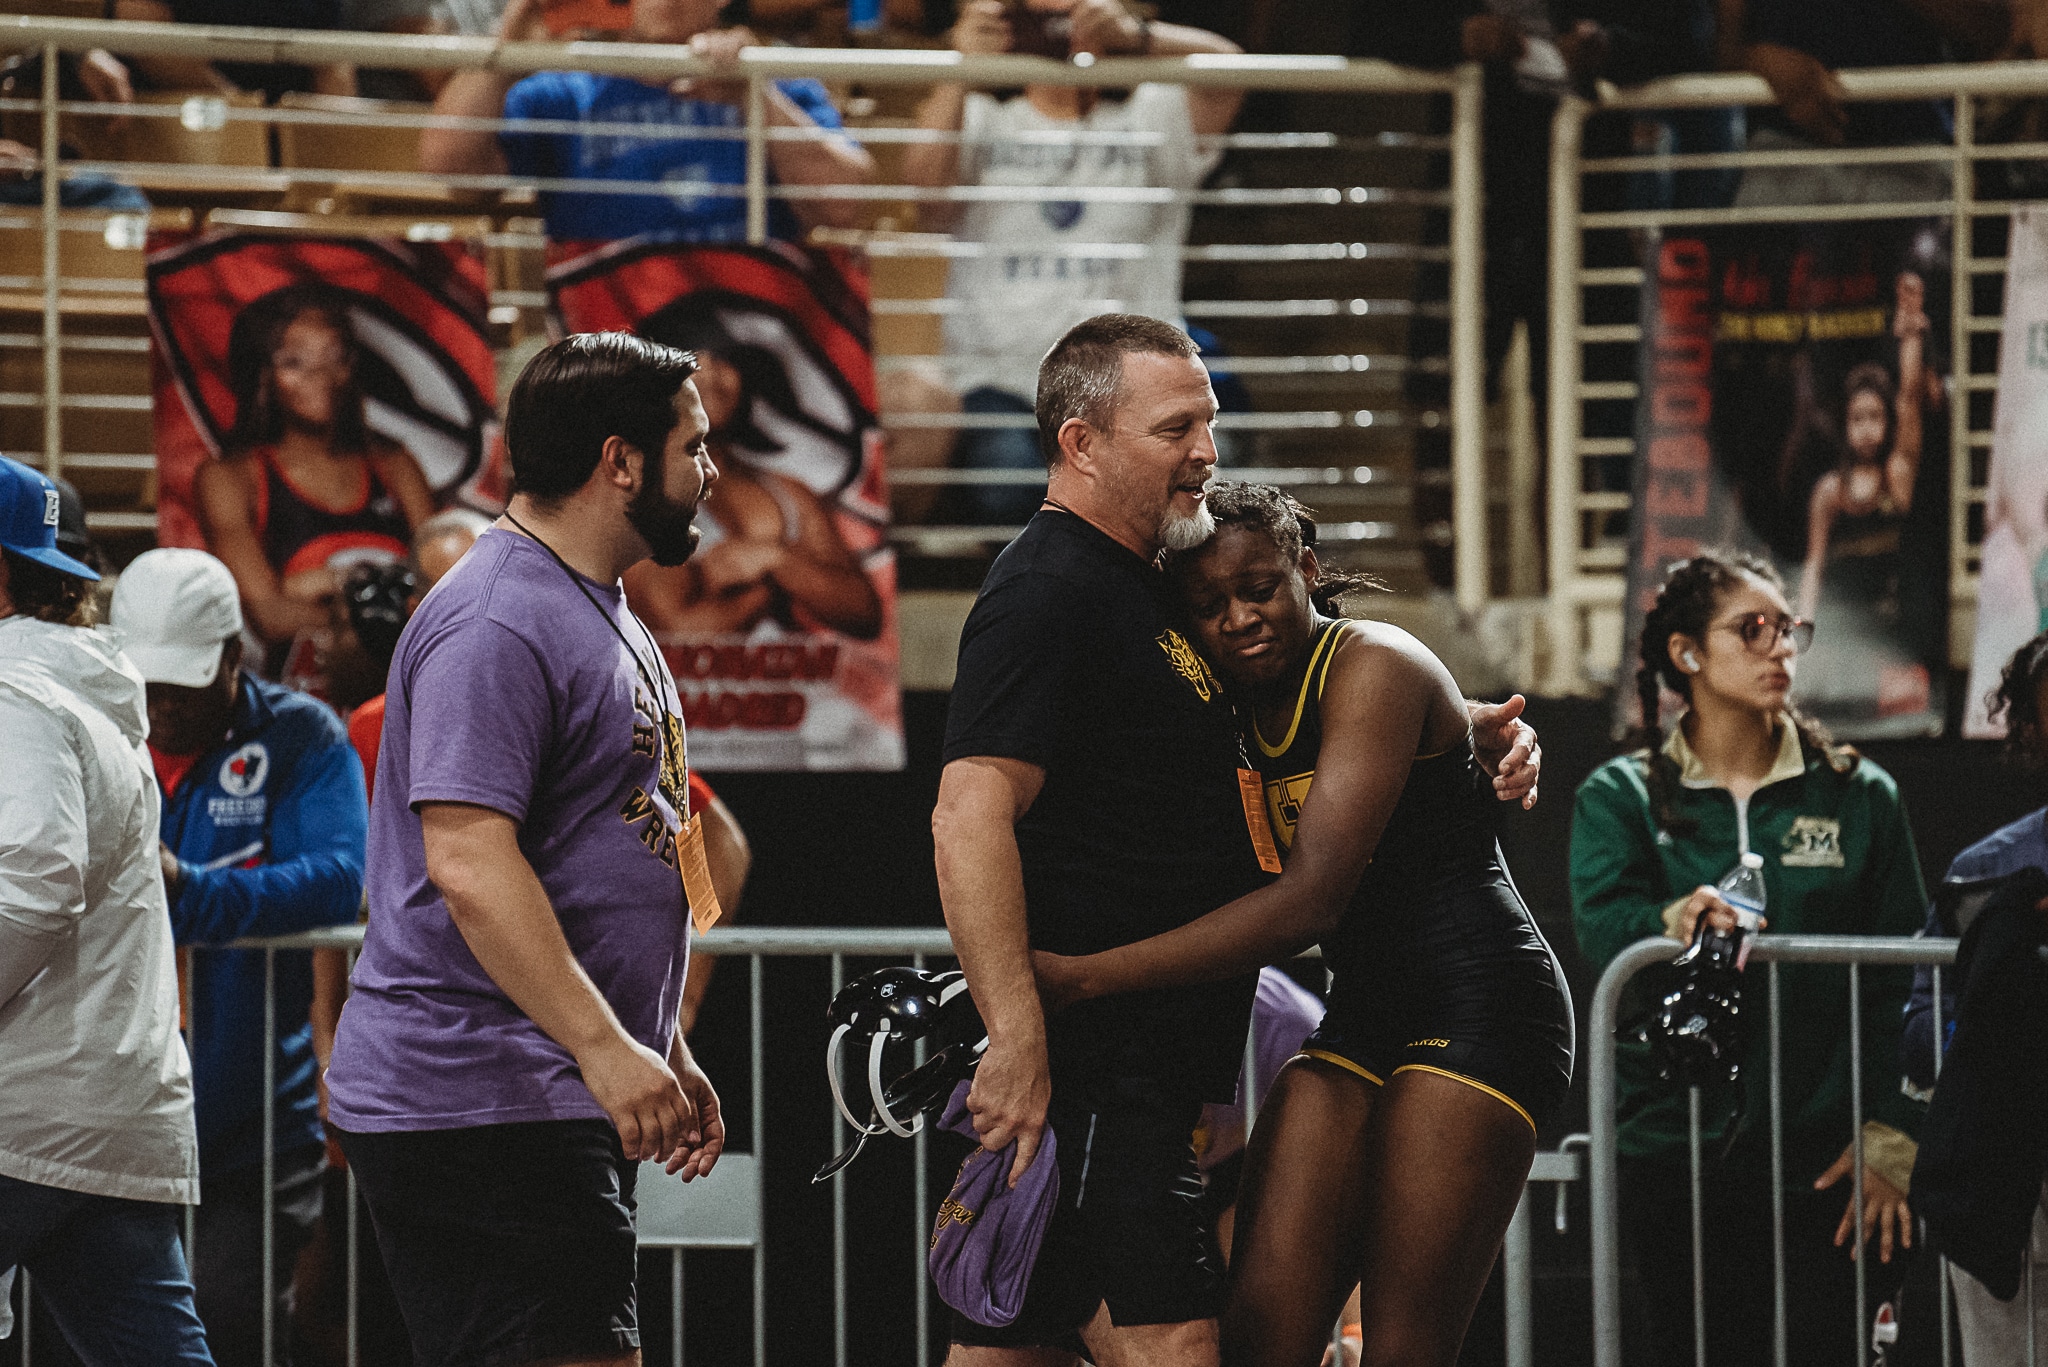 Olivia Brown hugs Coach Chance Phillips after earning a spot on the podium.